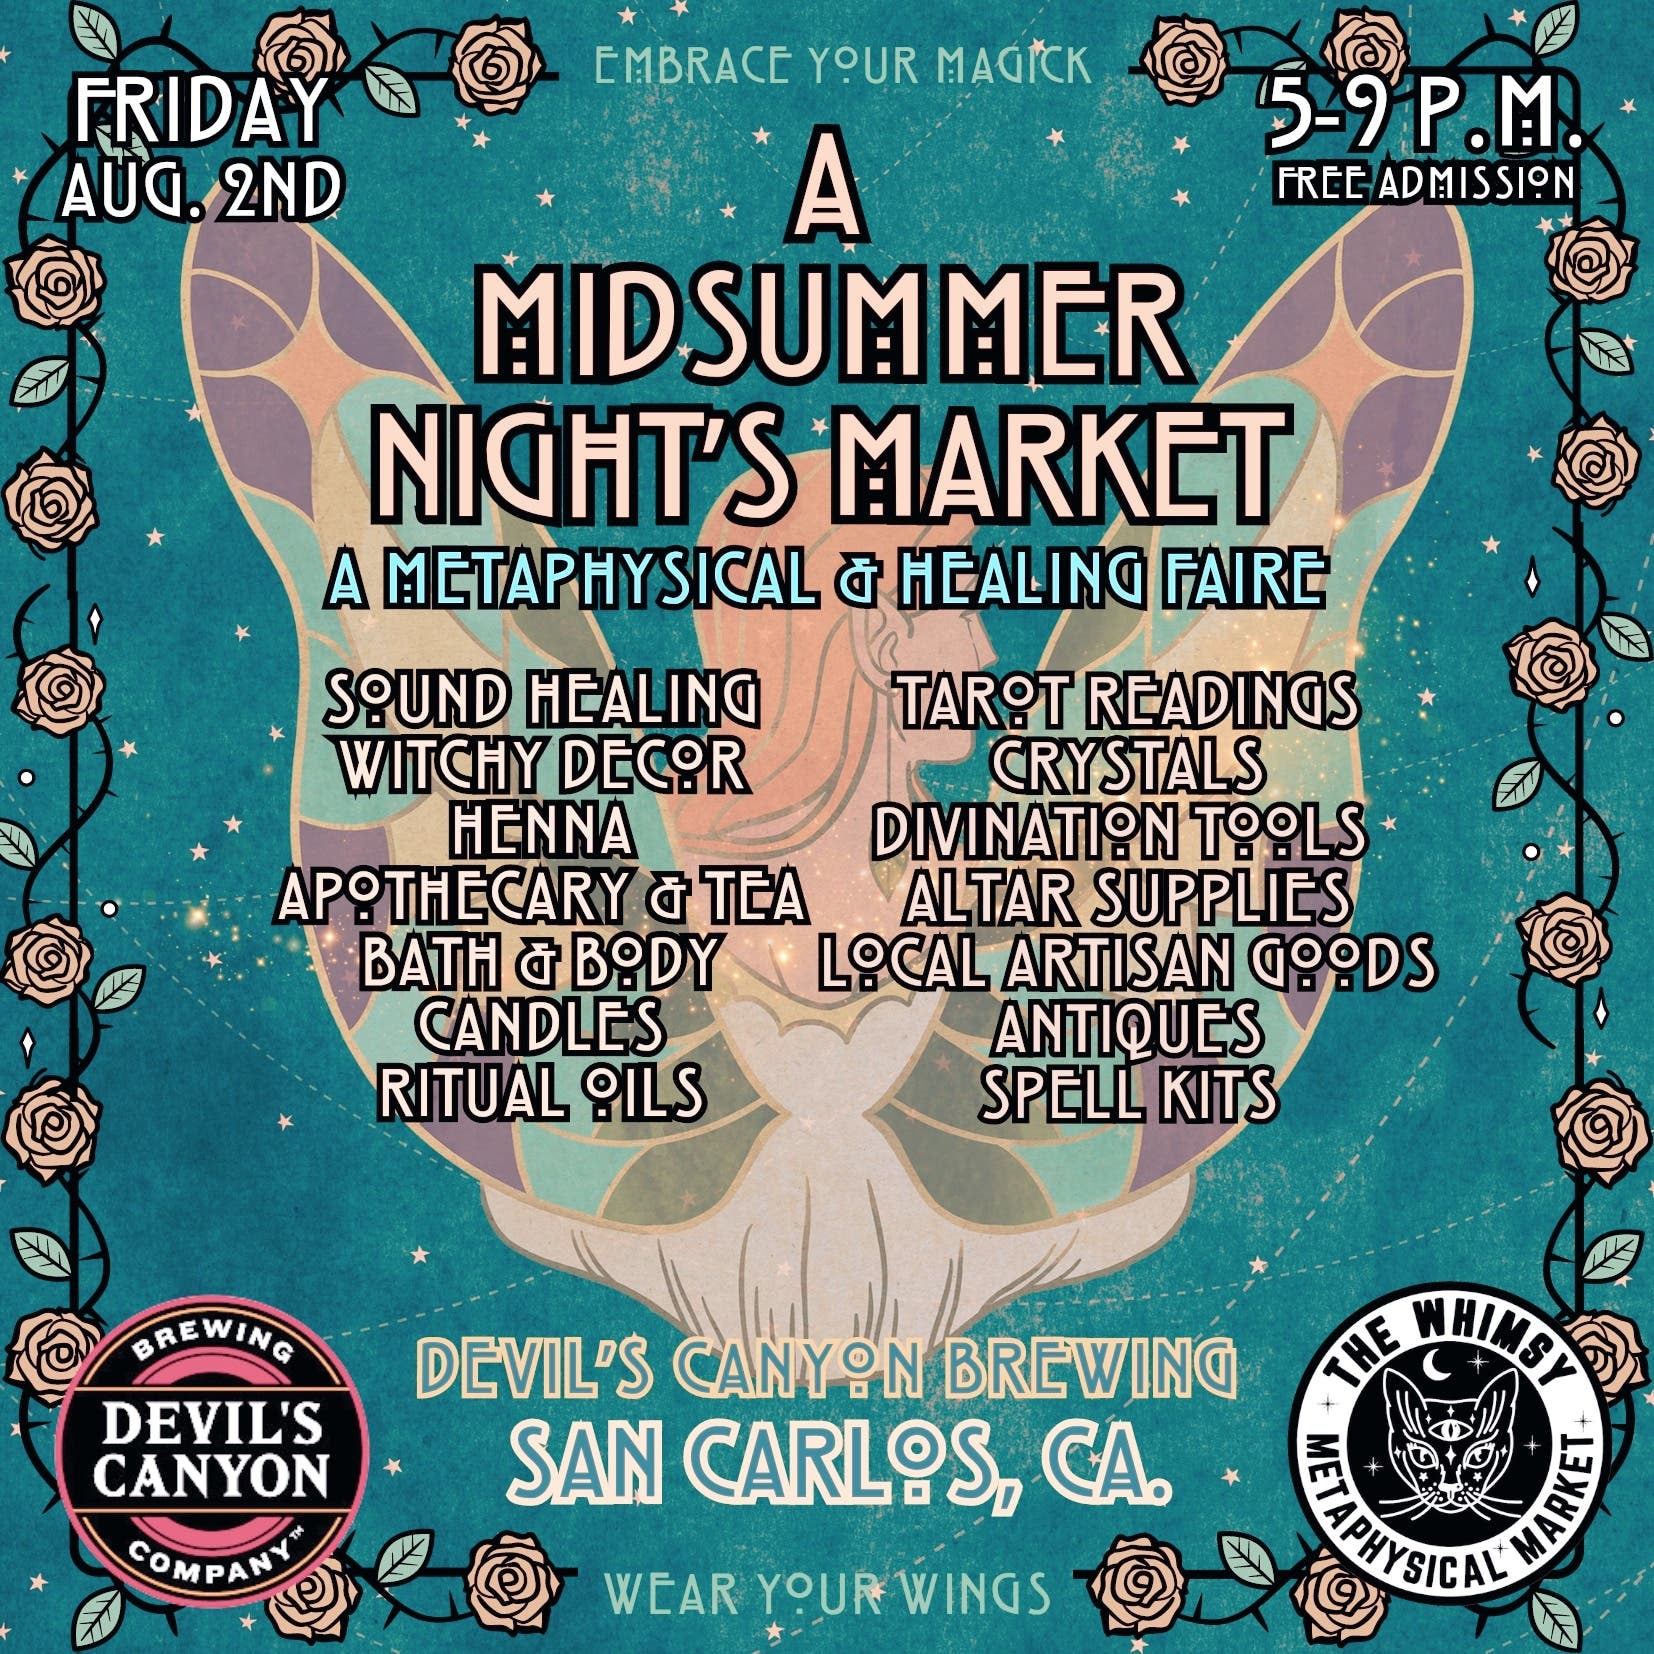 THE WHIMSY: A Midsummer Night’s Market 